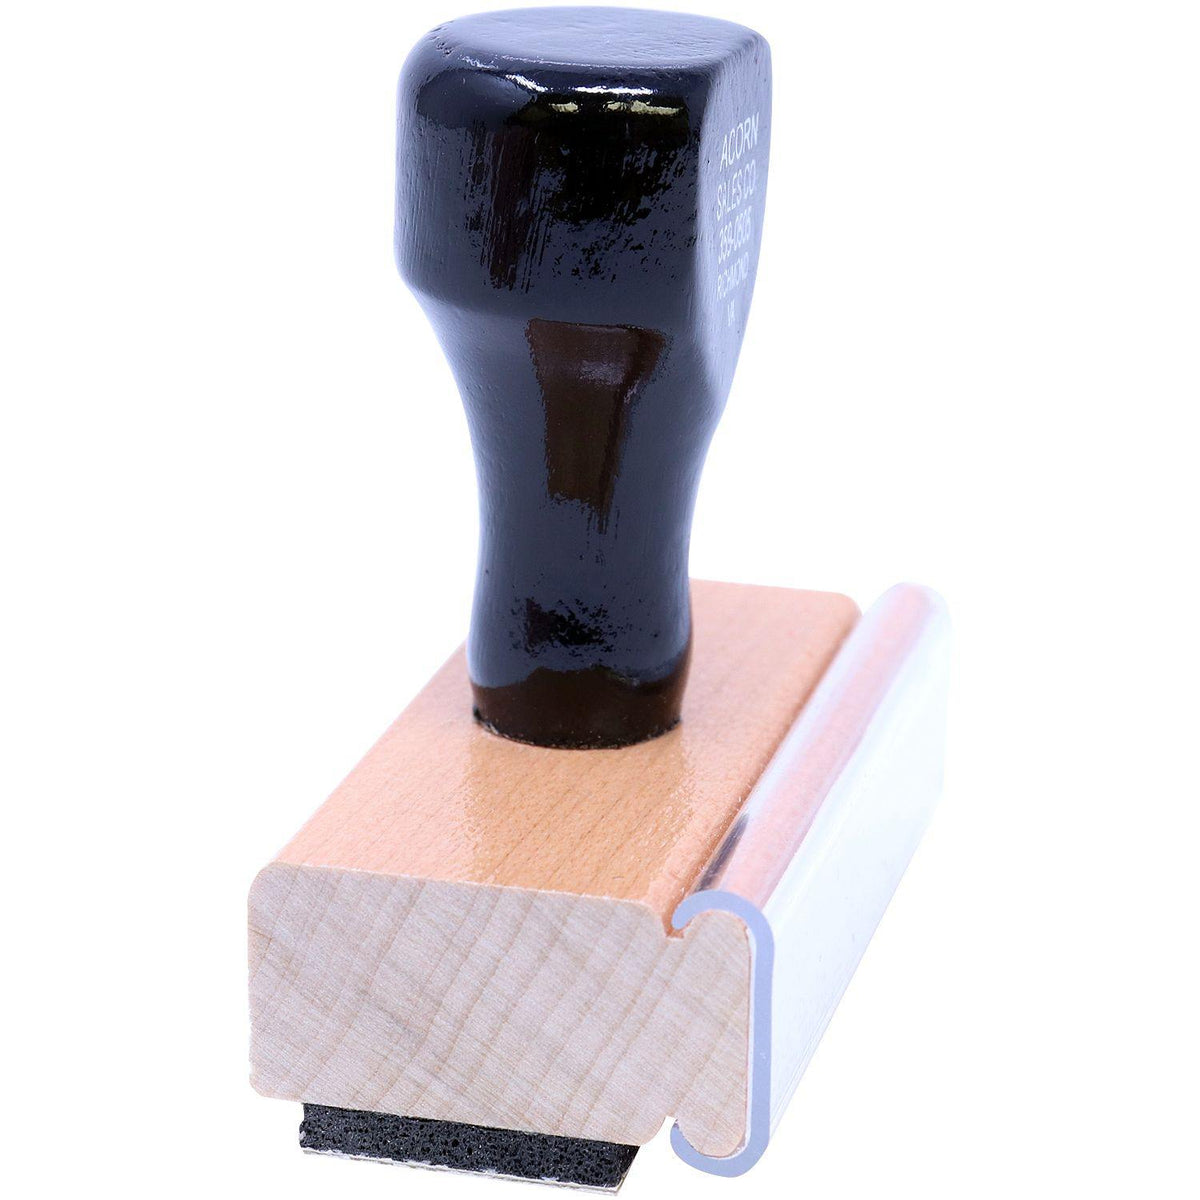 Side View of Large Advanced Placement Rubber Stamp at an Angle